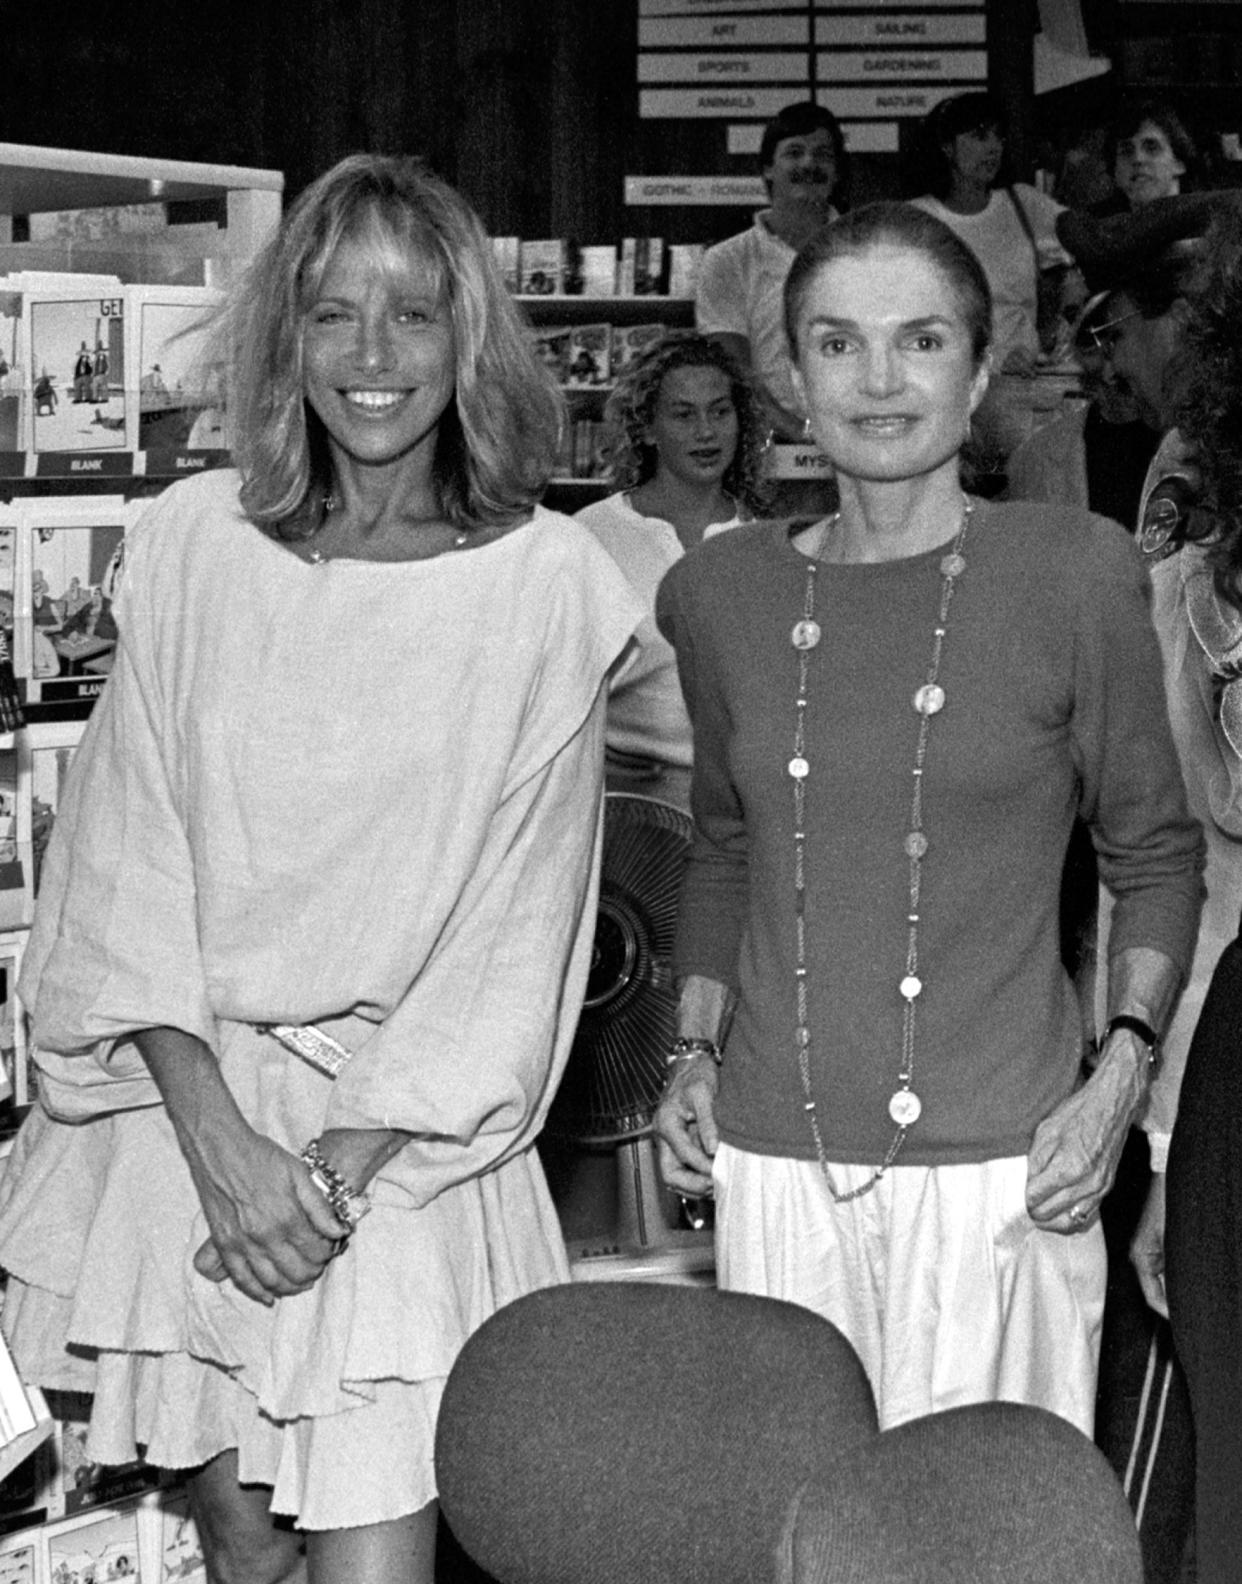 Good friends Carly Simon and Jackie Onassis pose for a picture at Bunch of Grapes Bookstore on Martha's Vineyard, Massachusetts, 9/2/89.   Photo by Stephen Rose   (Photo by Stephen Rose/Getty Images)